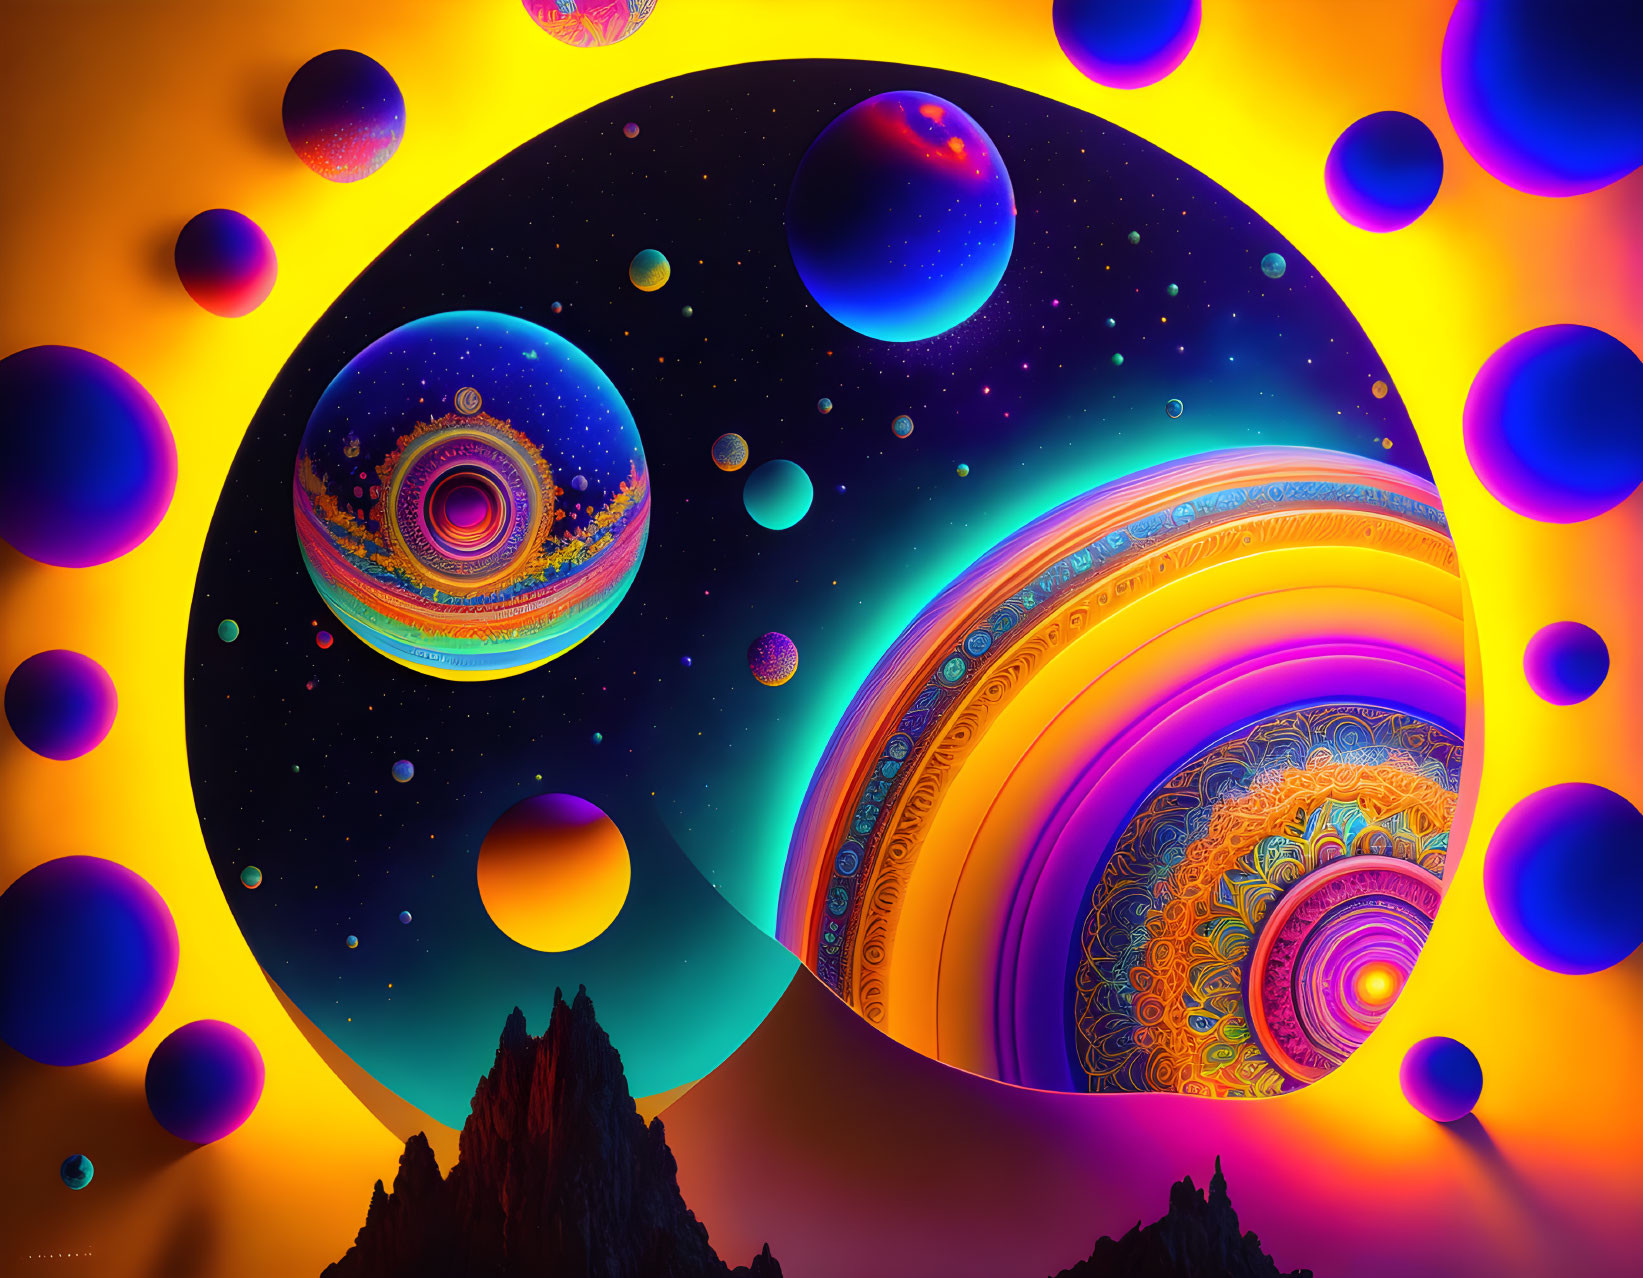 Colorful Psychedelic Digital Art: Cosmic Landscape with Orbs & Fractals